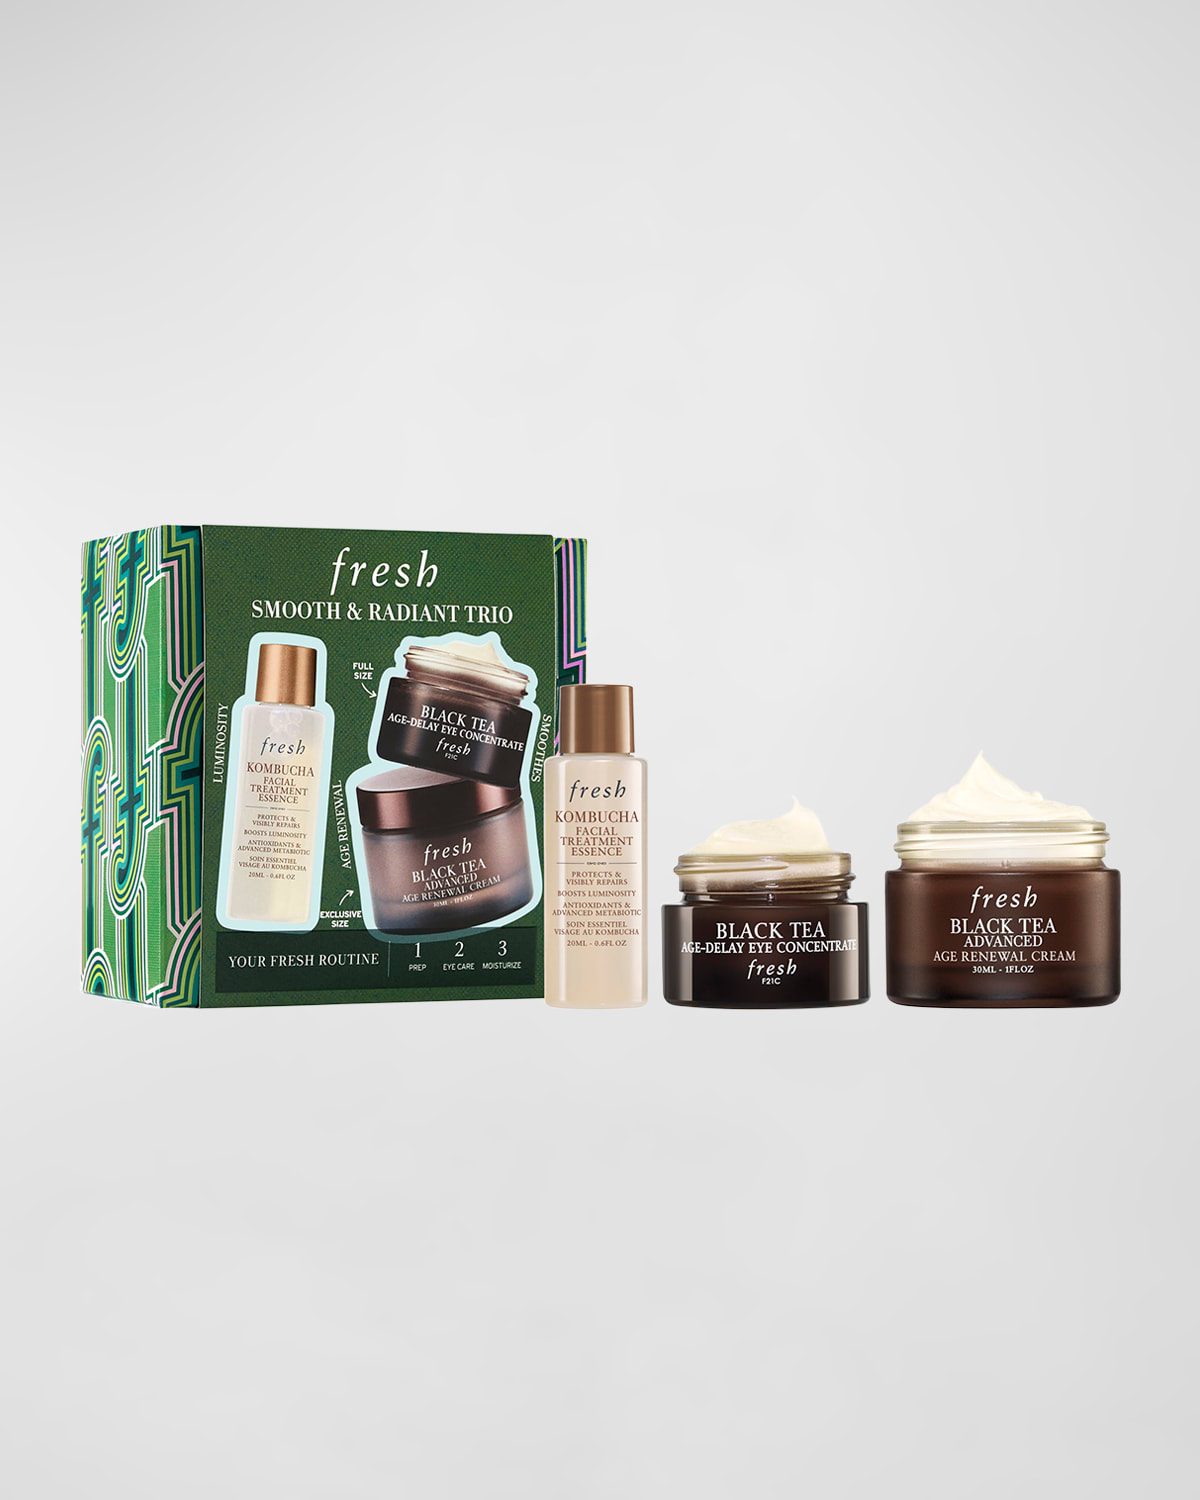 Limited Edition Smooth & Radiant Trio Skincare Set ($142 Value)